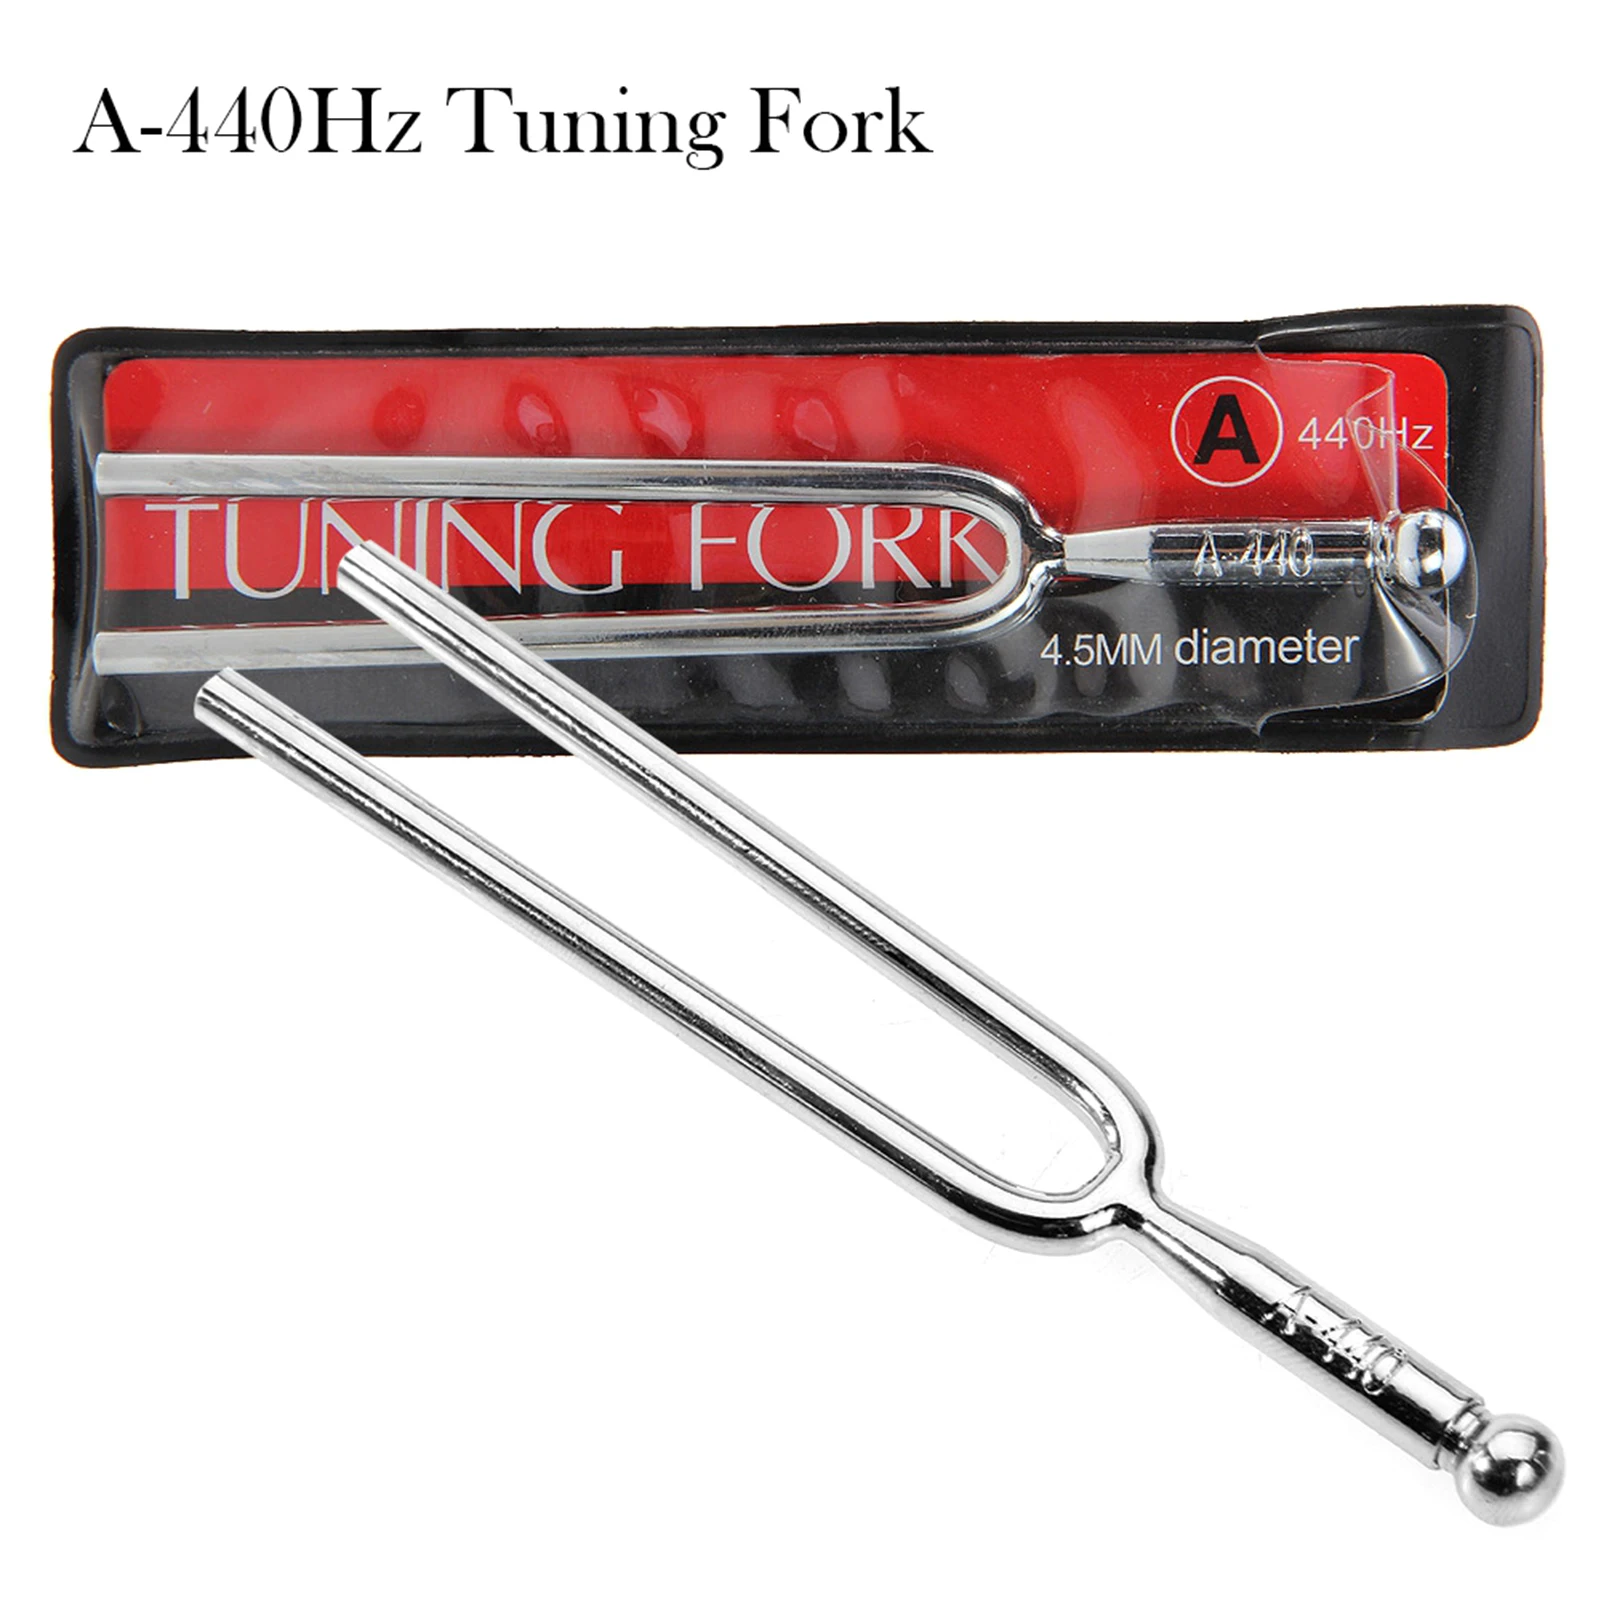 

Tuning Fork 440Hz Stainless Steel Tone Tuner Fork for Violin Viola Cello Guitar Stringed Instrument Tool